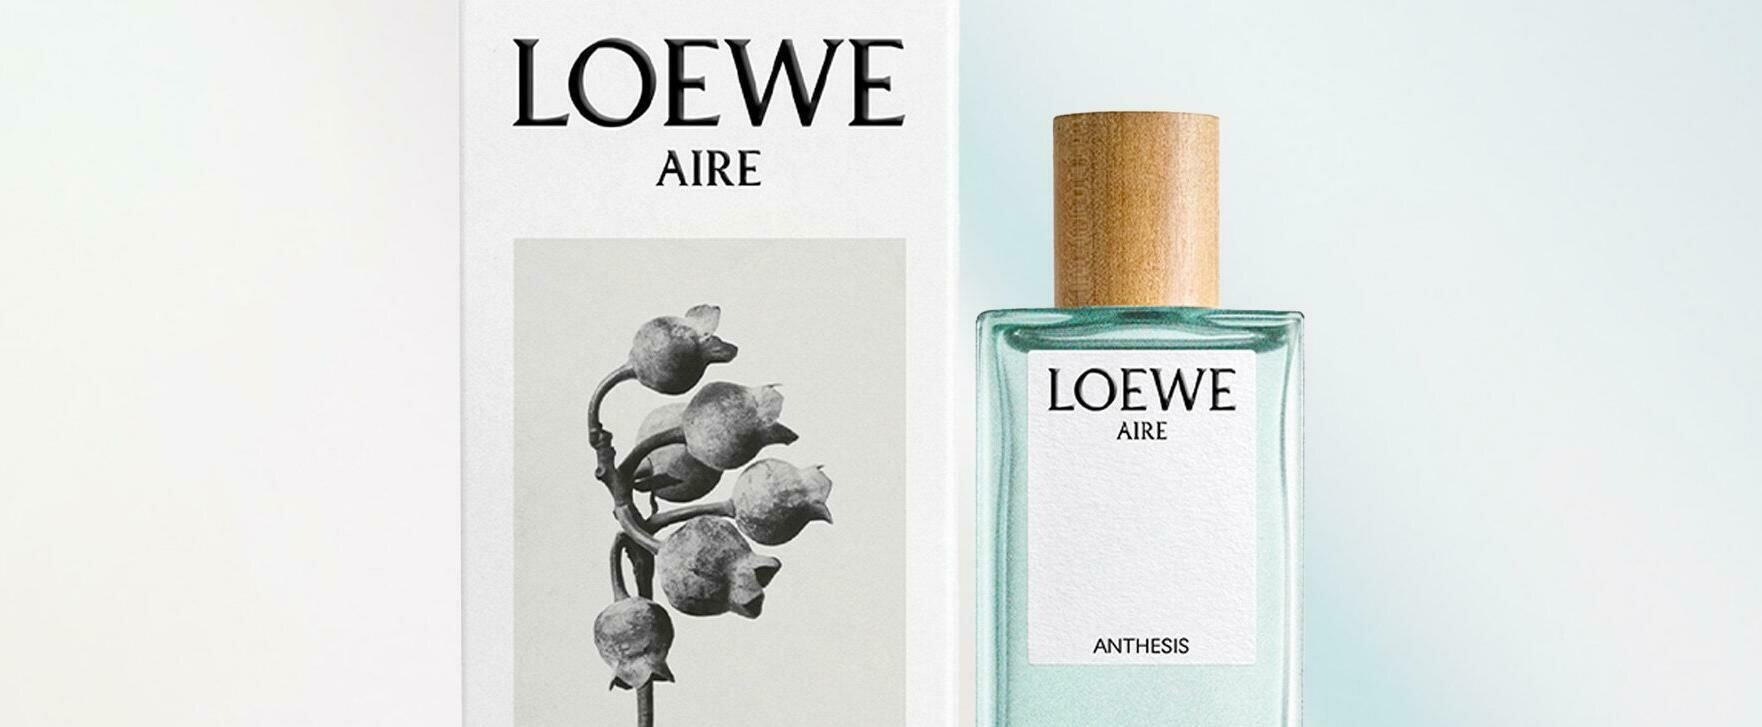 Loewe Presents "Aire Anthesis" as a New Highlight of the "Aire" Collection